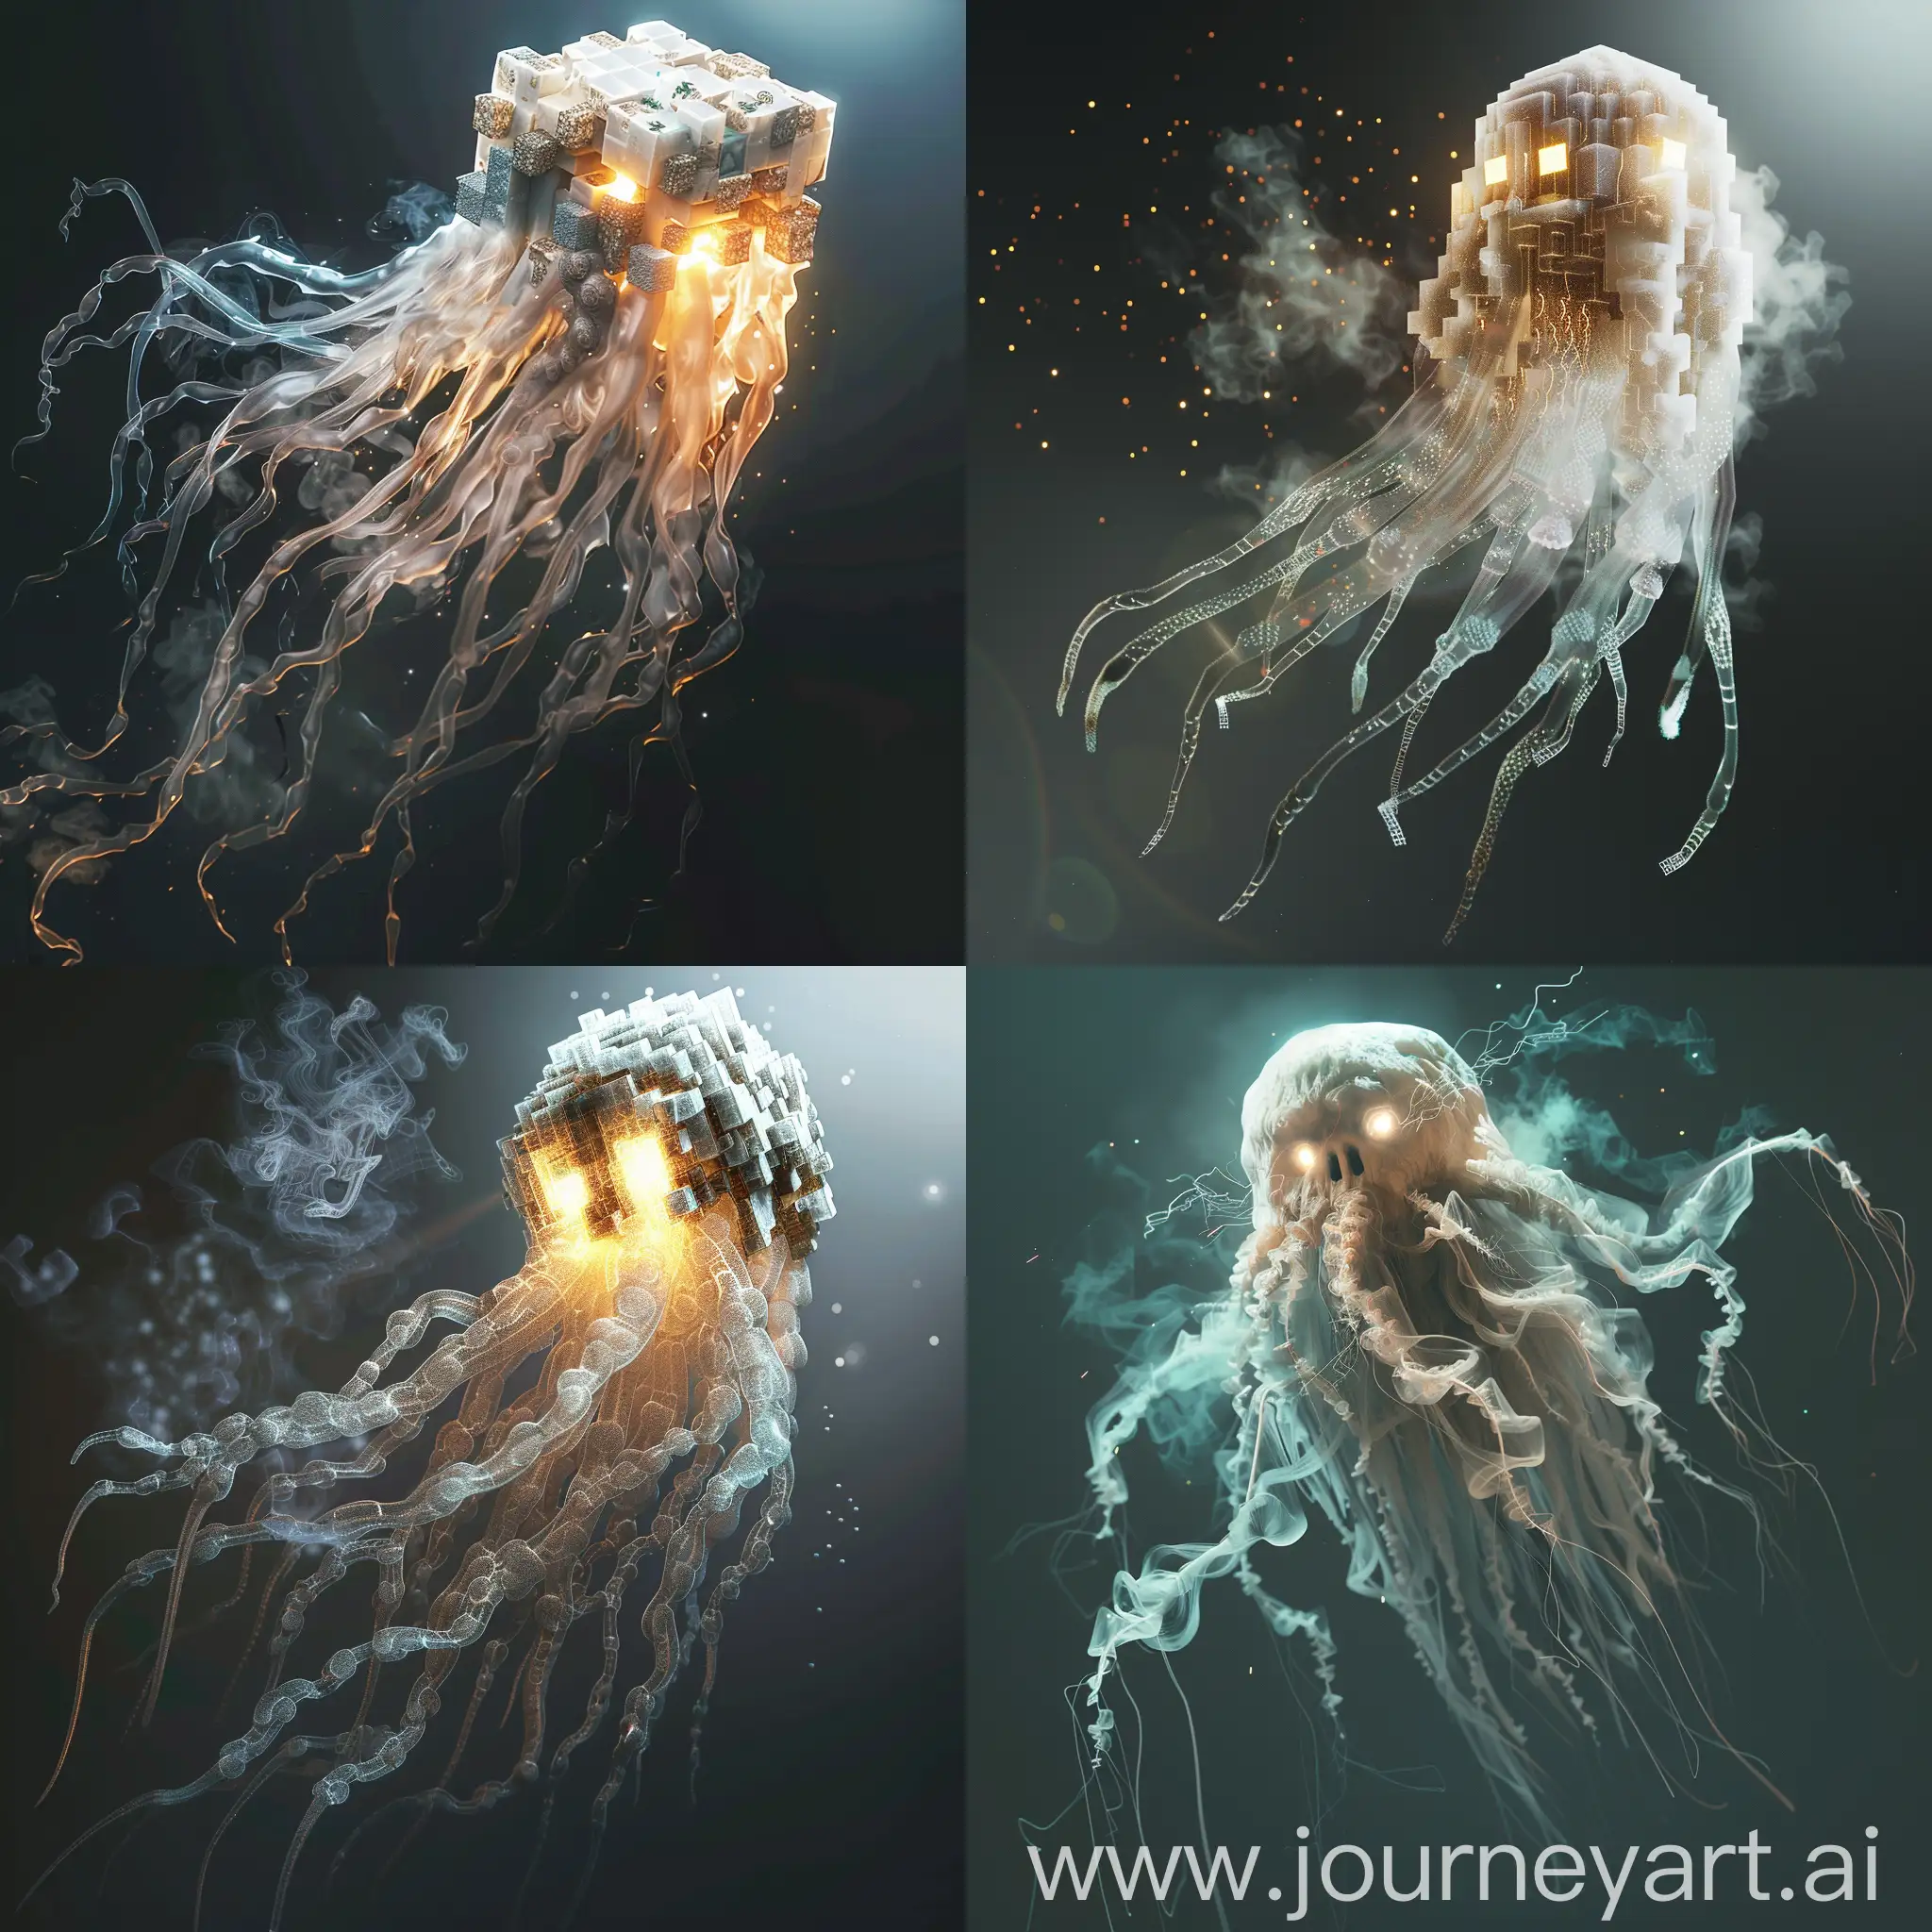 A photorealistic depiction of a Minecraft Ghast, a large, floating, jellyfish-like creature with long, translucent tentacles, Focus on the details of the Ghast's body, including its textured skin, glowing eyes, and wispy smoke particles emanating from its core, Use realistic lighting and shadows to create a sense of depth and dimension.